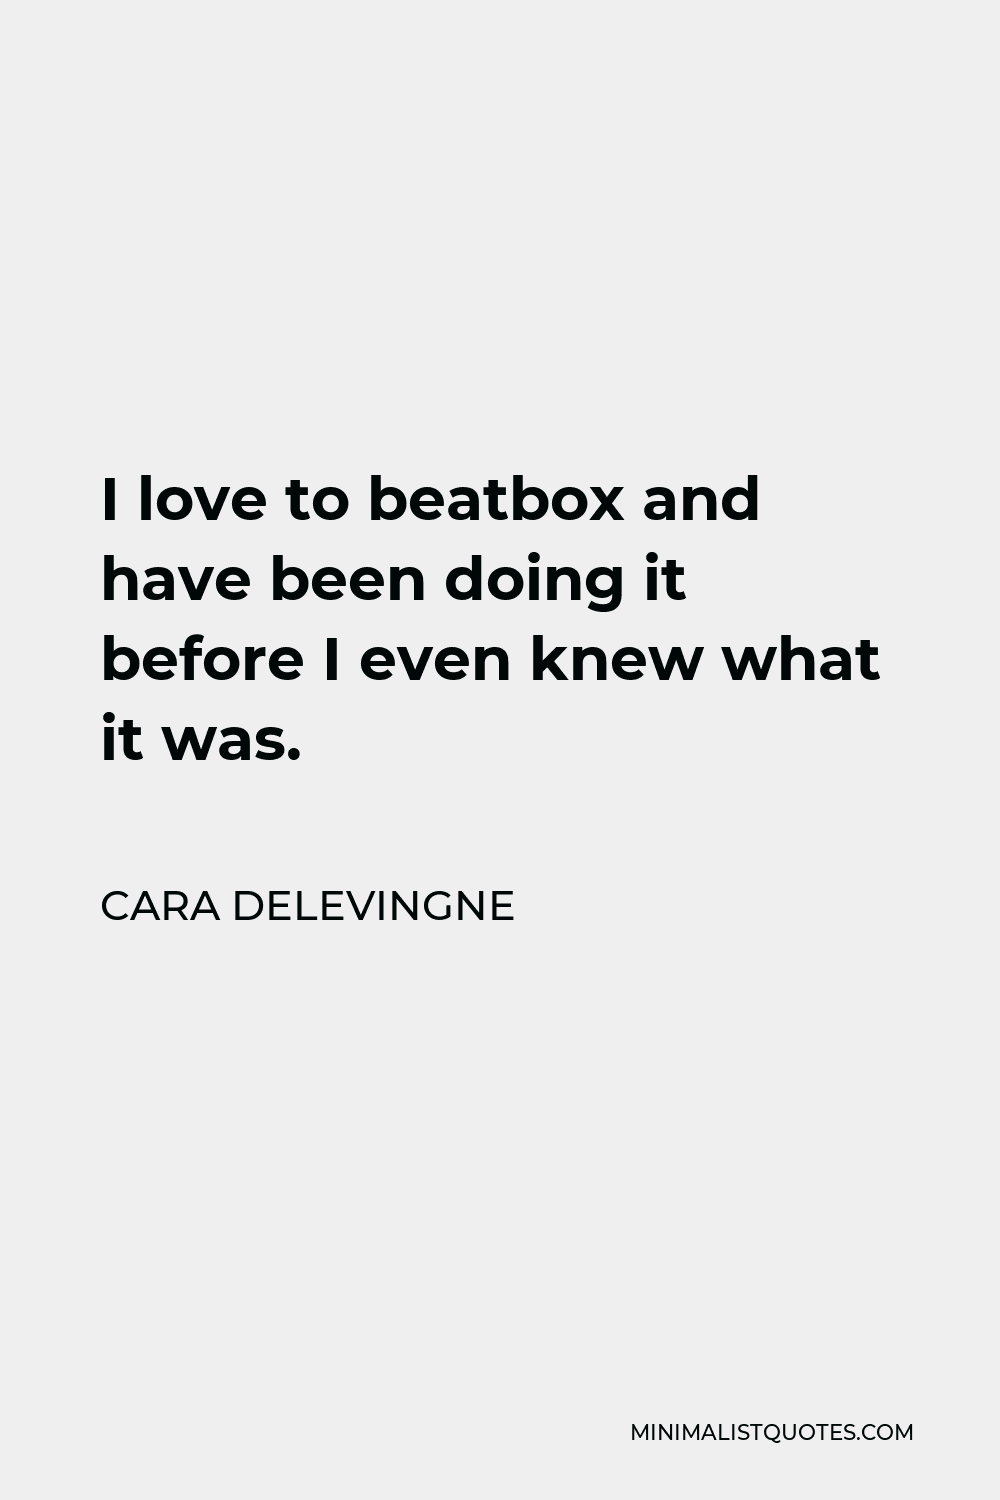 Cara Delevingne Quote - I love to beatbox and have been doing it before I even knew what it was.